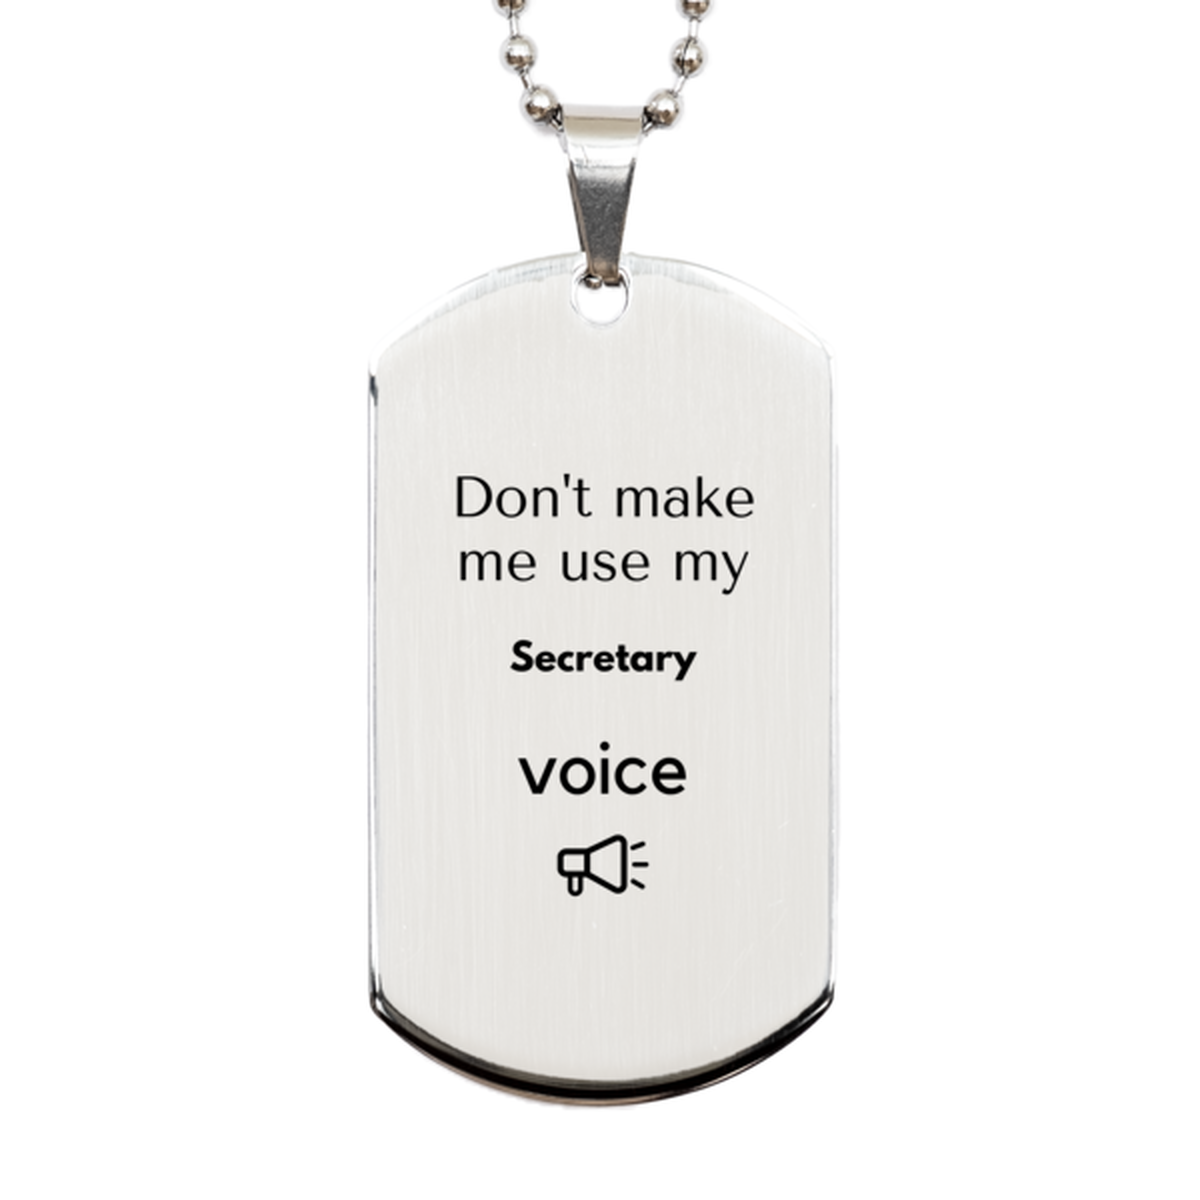 Don't make me use my Secretary voice, Sarcasm Secretary Gifts, Christmas Secretary Silver Dog Tag Birthday Unique Gifts For Secretary Coworkers, Men, Women, Colleague, Friends